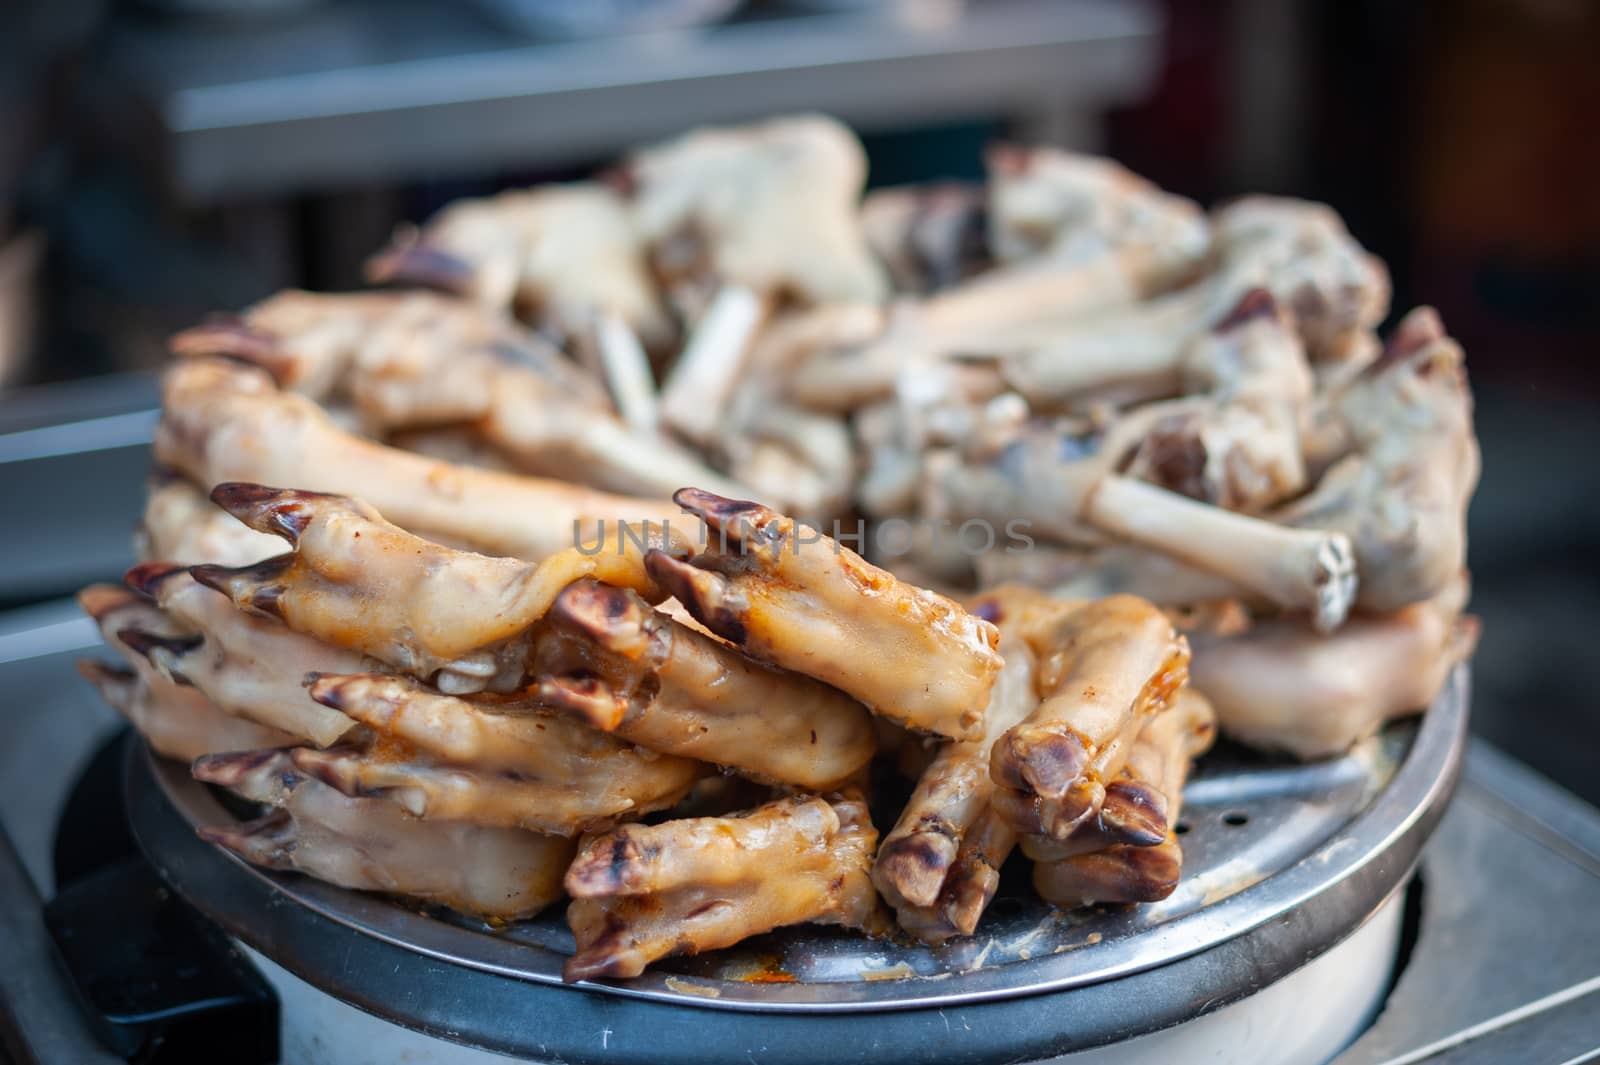 Cooked sheep's hooves in a street market in Xi'an, Shaanxi province, China